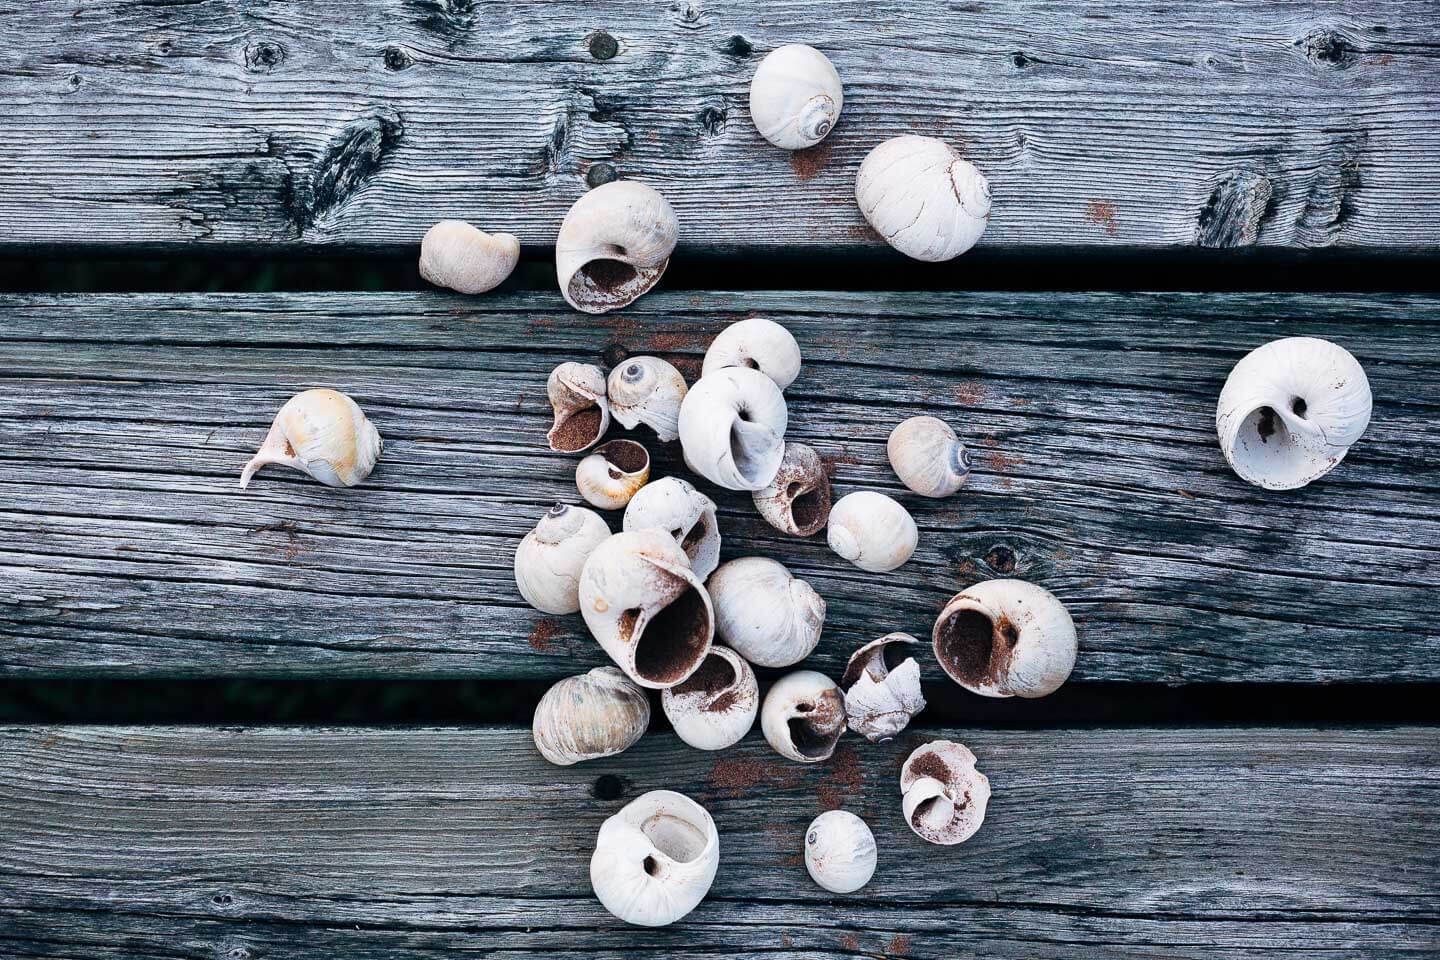 Snail shells from the Beach at Durrell Point